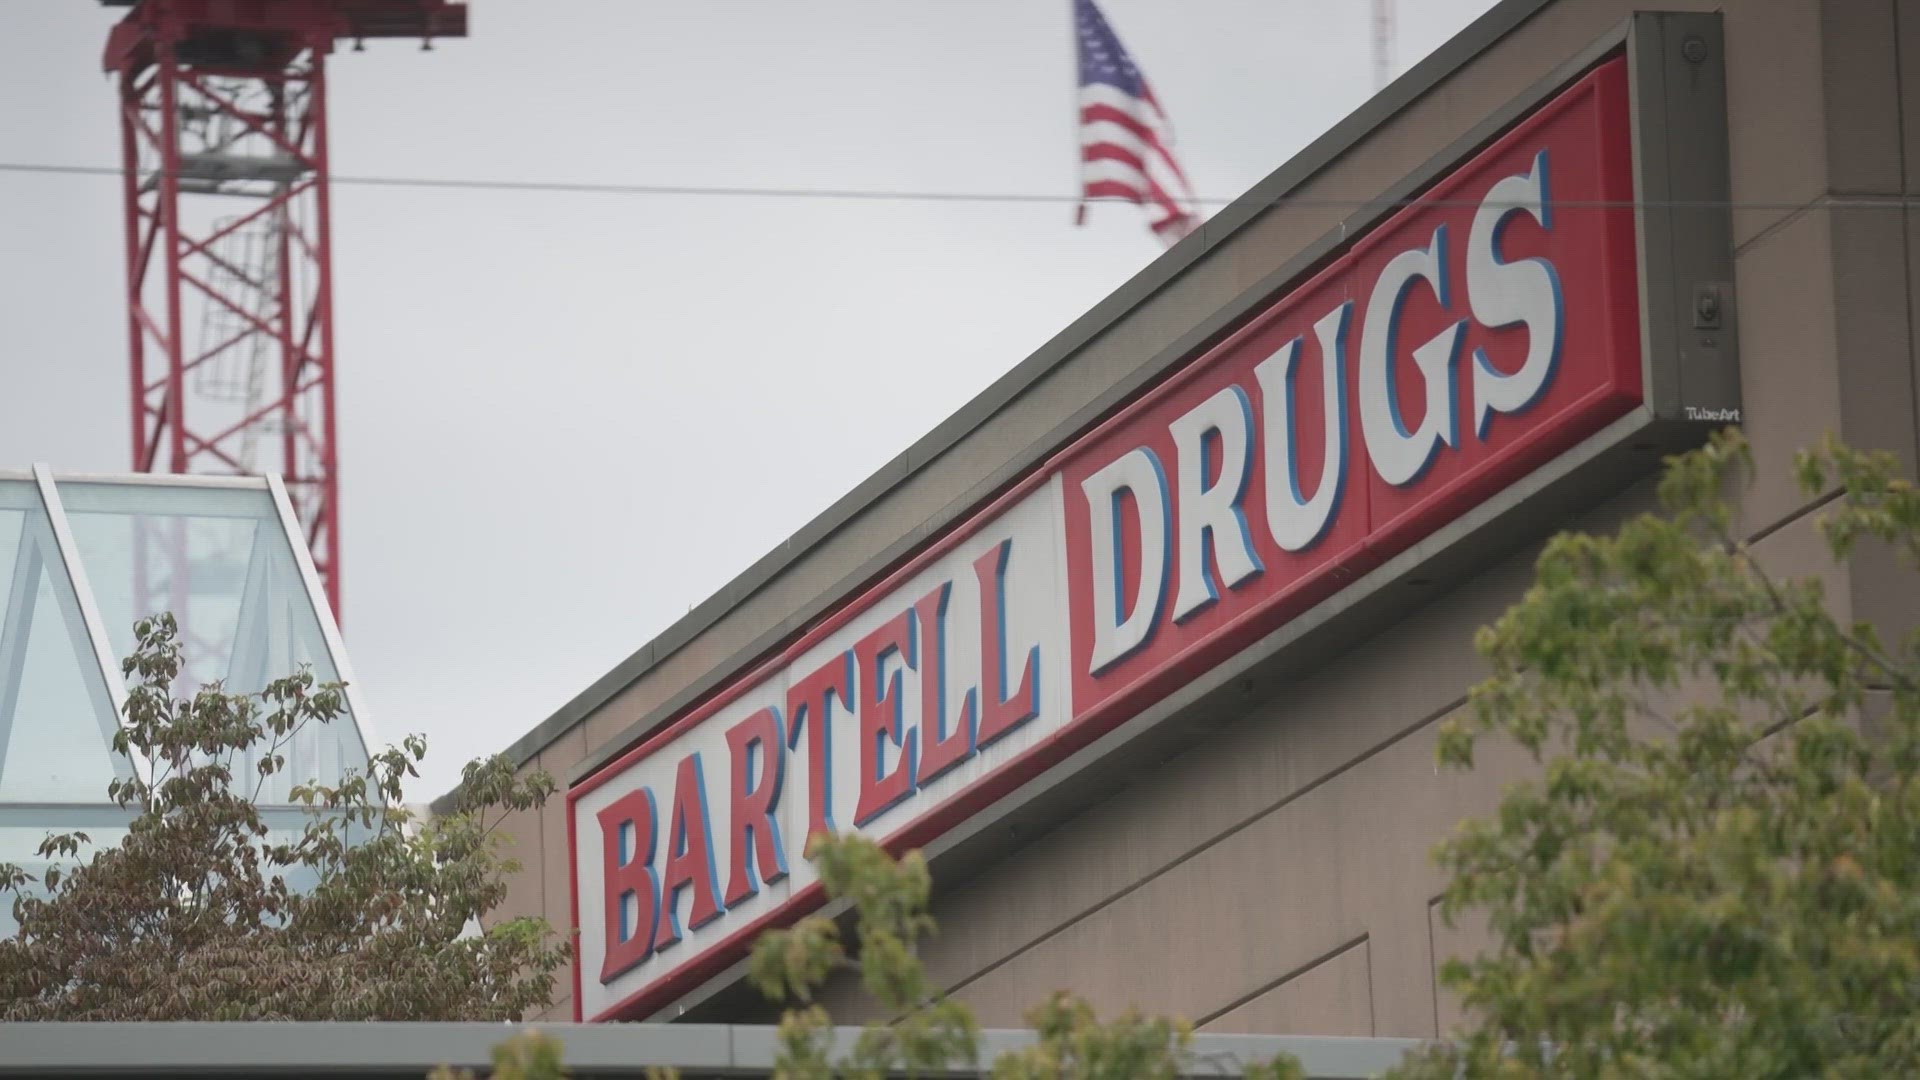 While some businesses like Bartell Drugs and Mud Bay will be closing their doors, other businesses have plans to expand to the neighborhood.